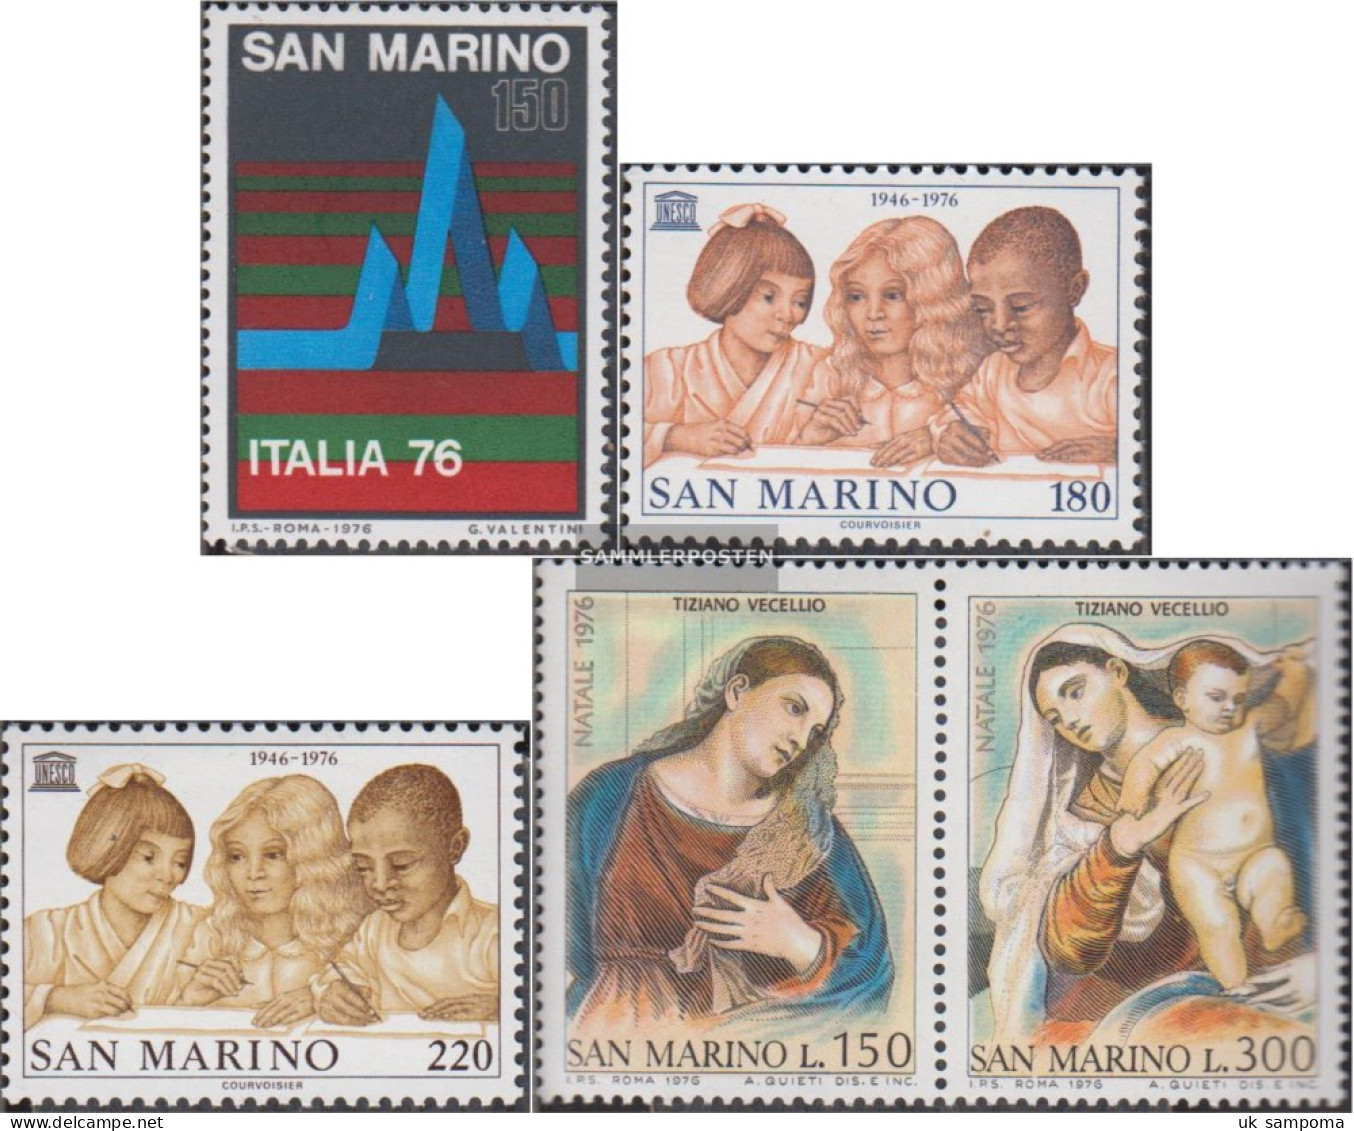 San Marino 1122,1123-1124,1125-1126 Couple (complete Issue) Unmounted Mint / Never Hinged 1976 Philately, UNESCO, Christ - Unused Stamps